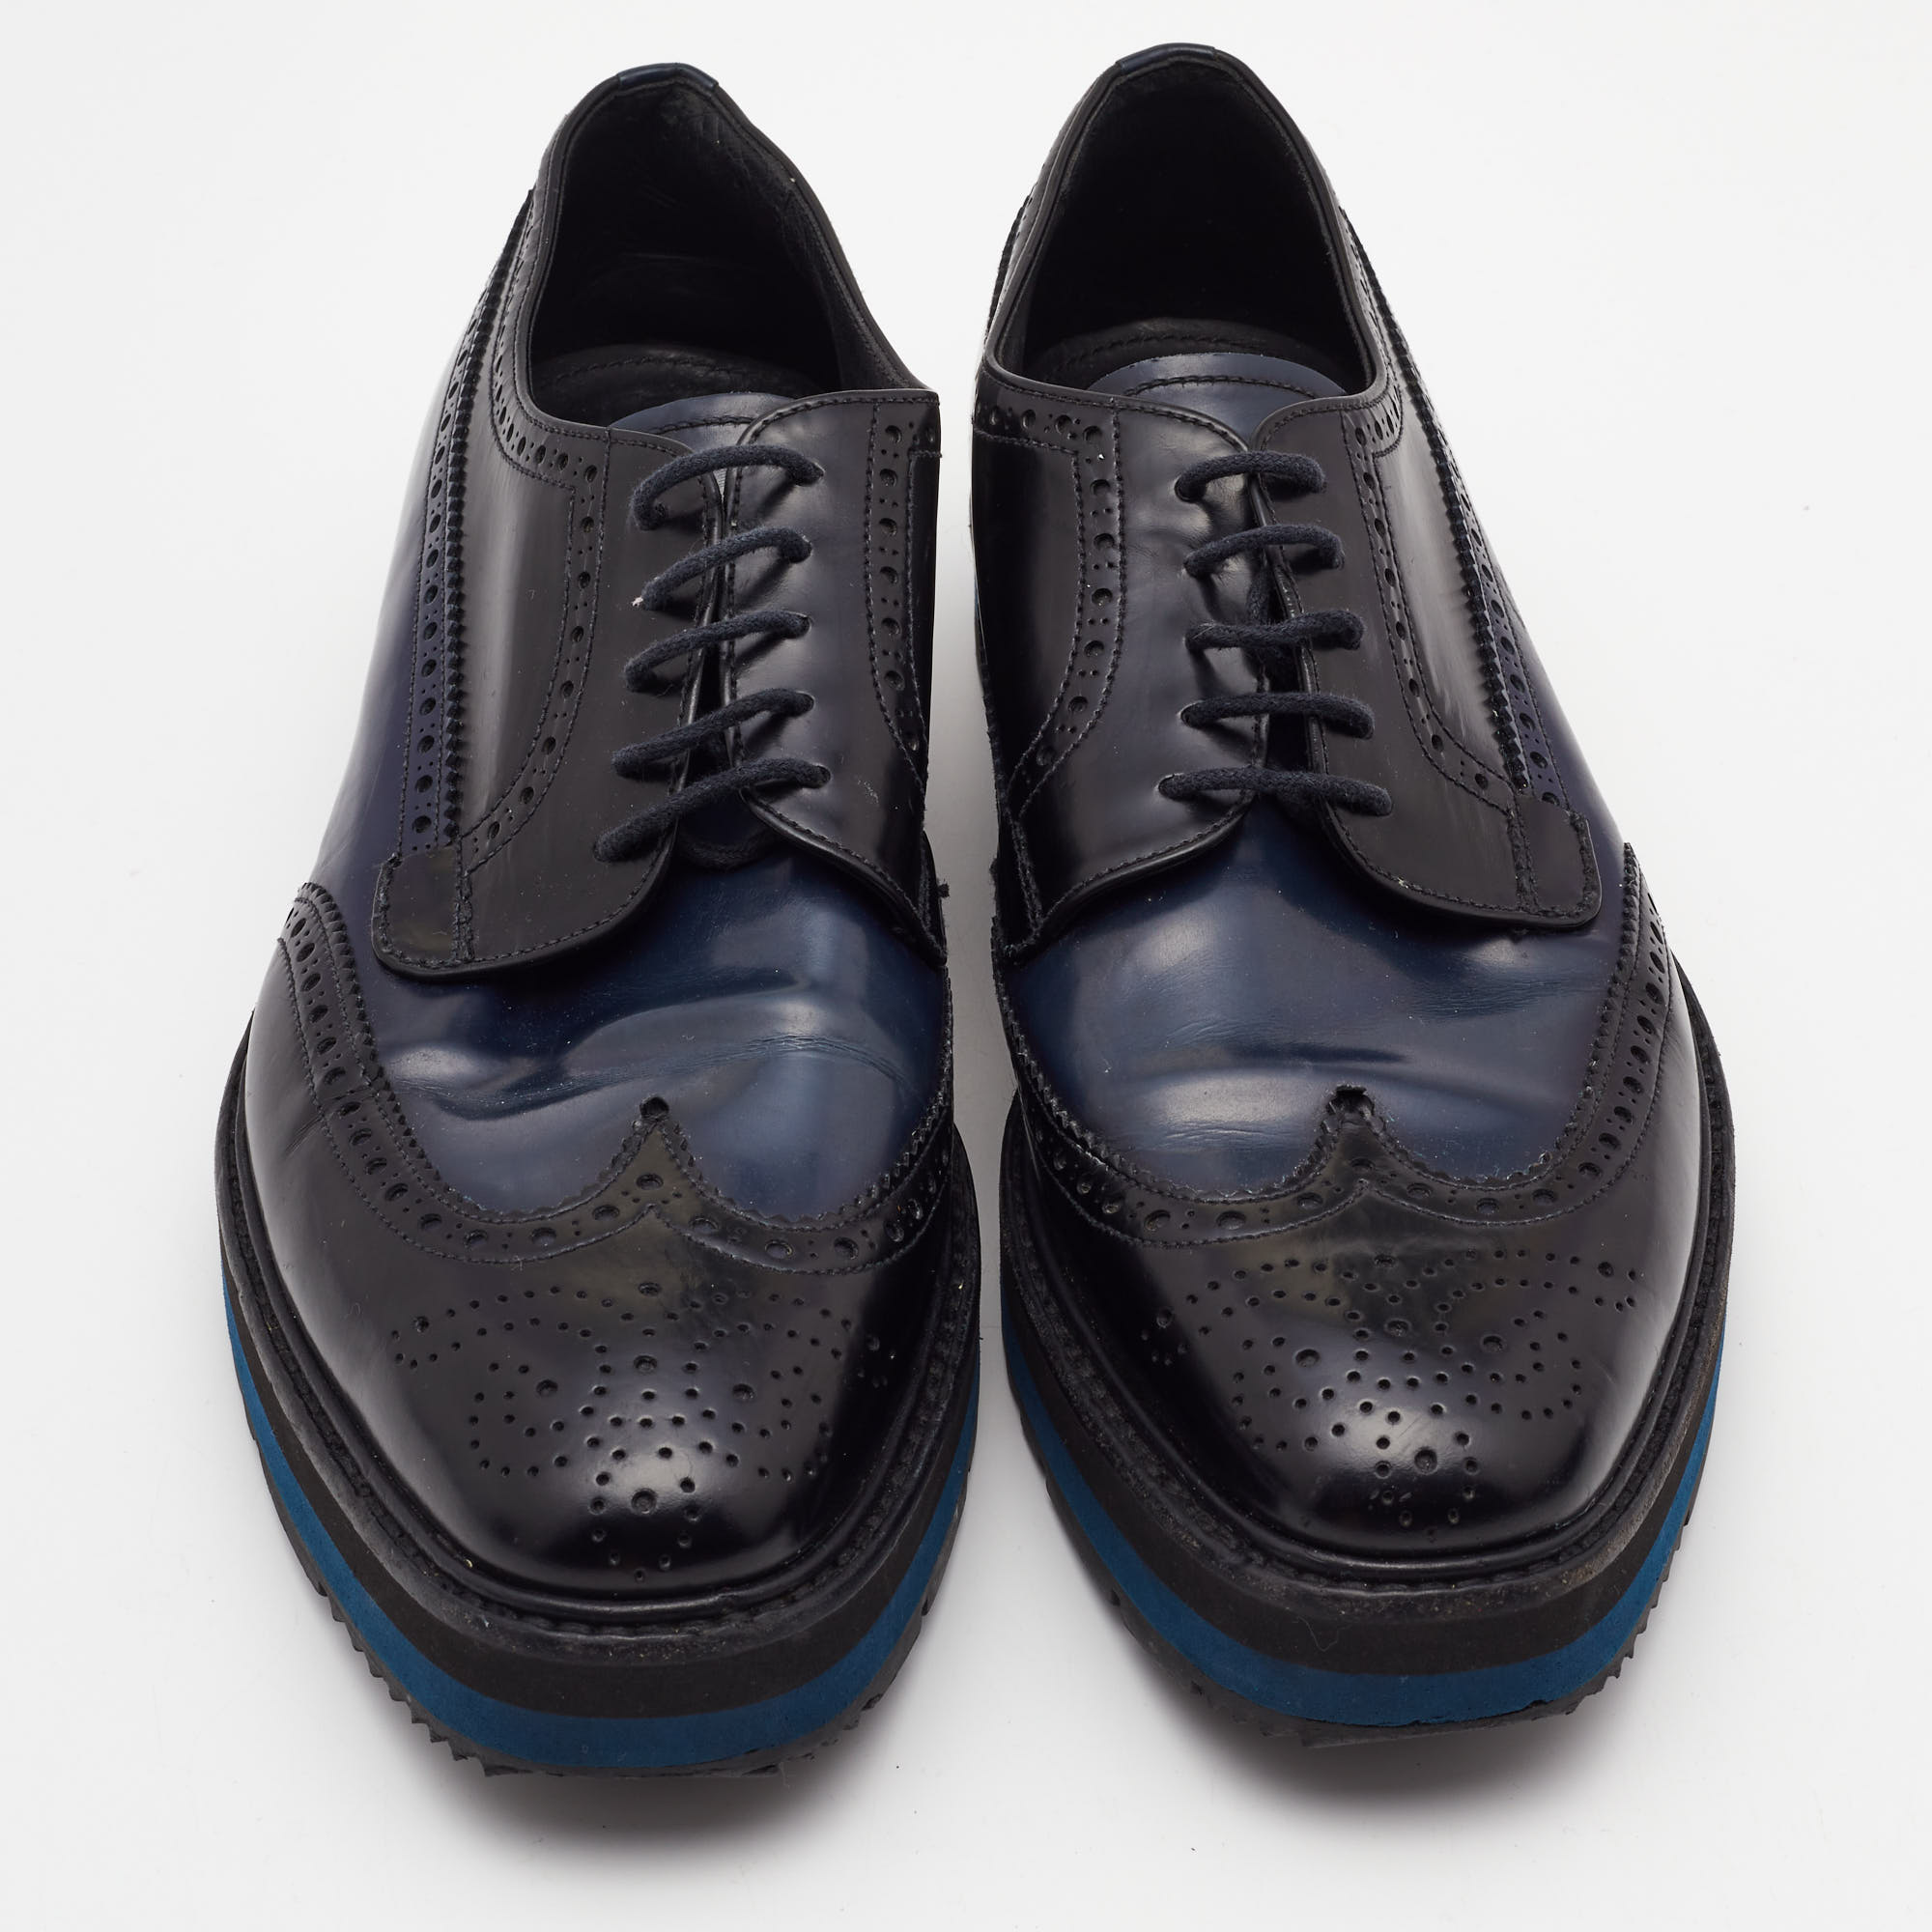 Prada Black/Navy Blue Patent Leather Brogue Oxford Sneakers Size 39